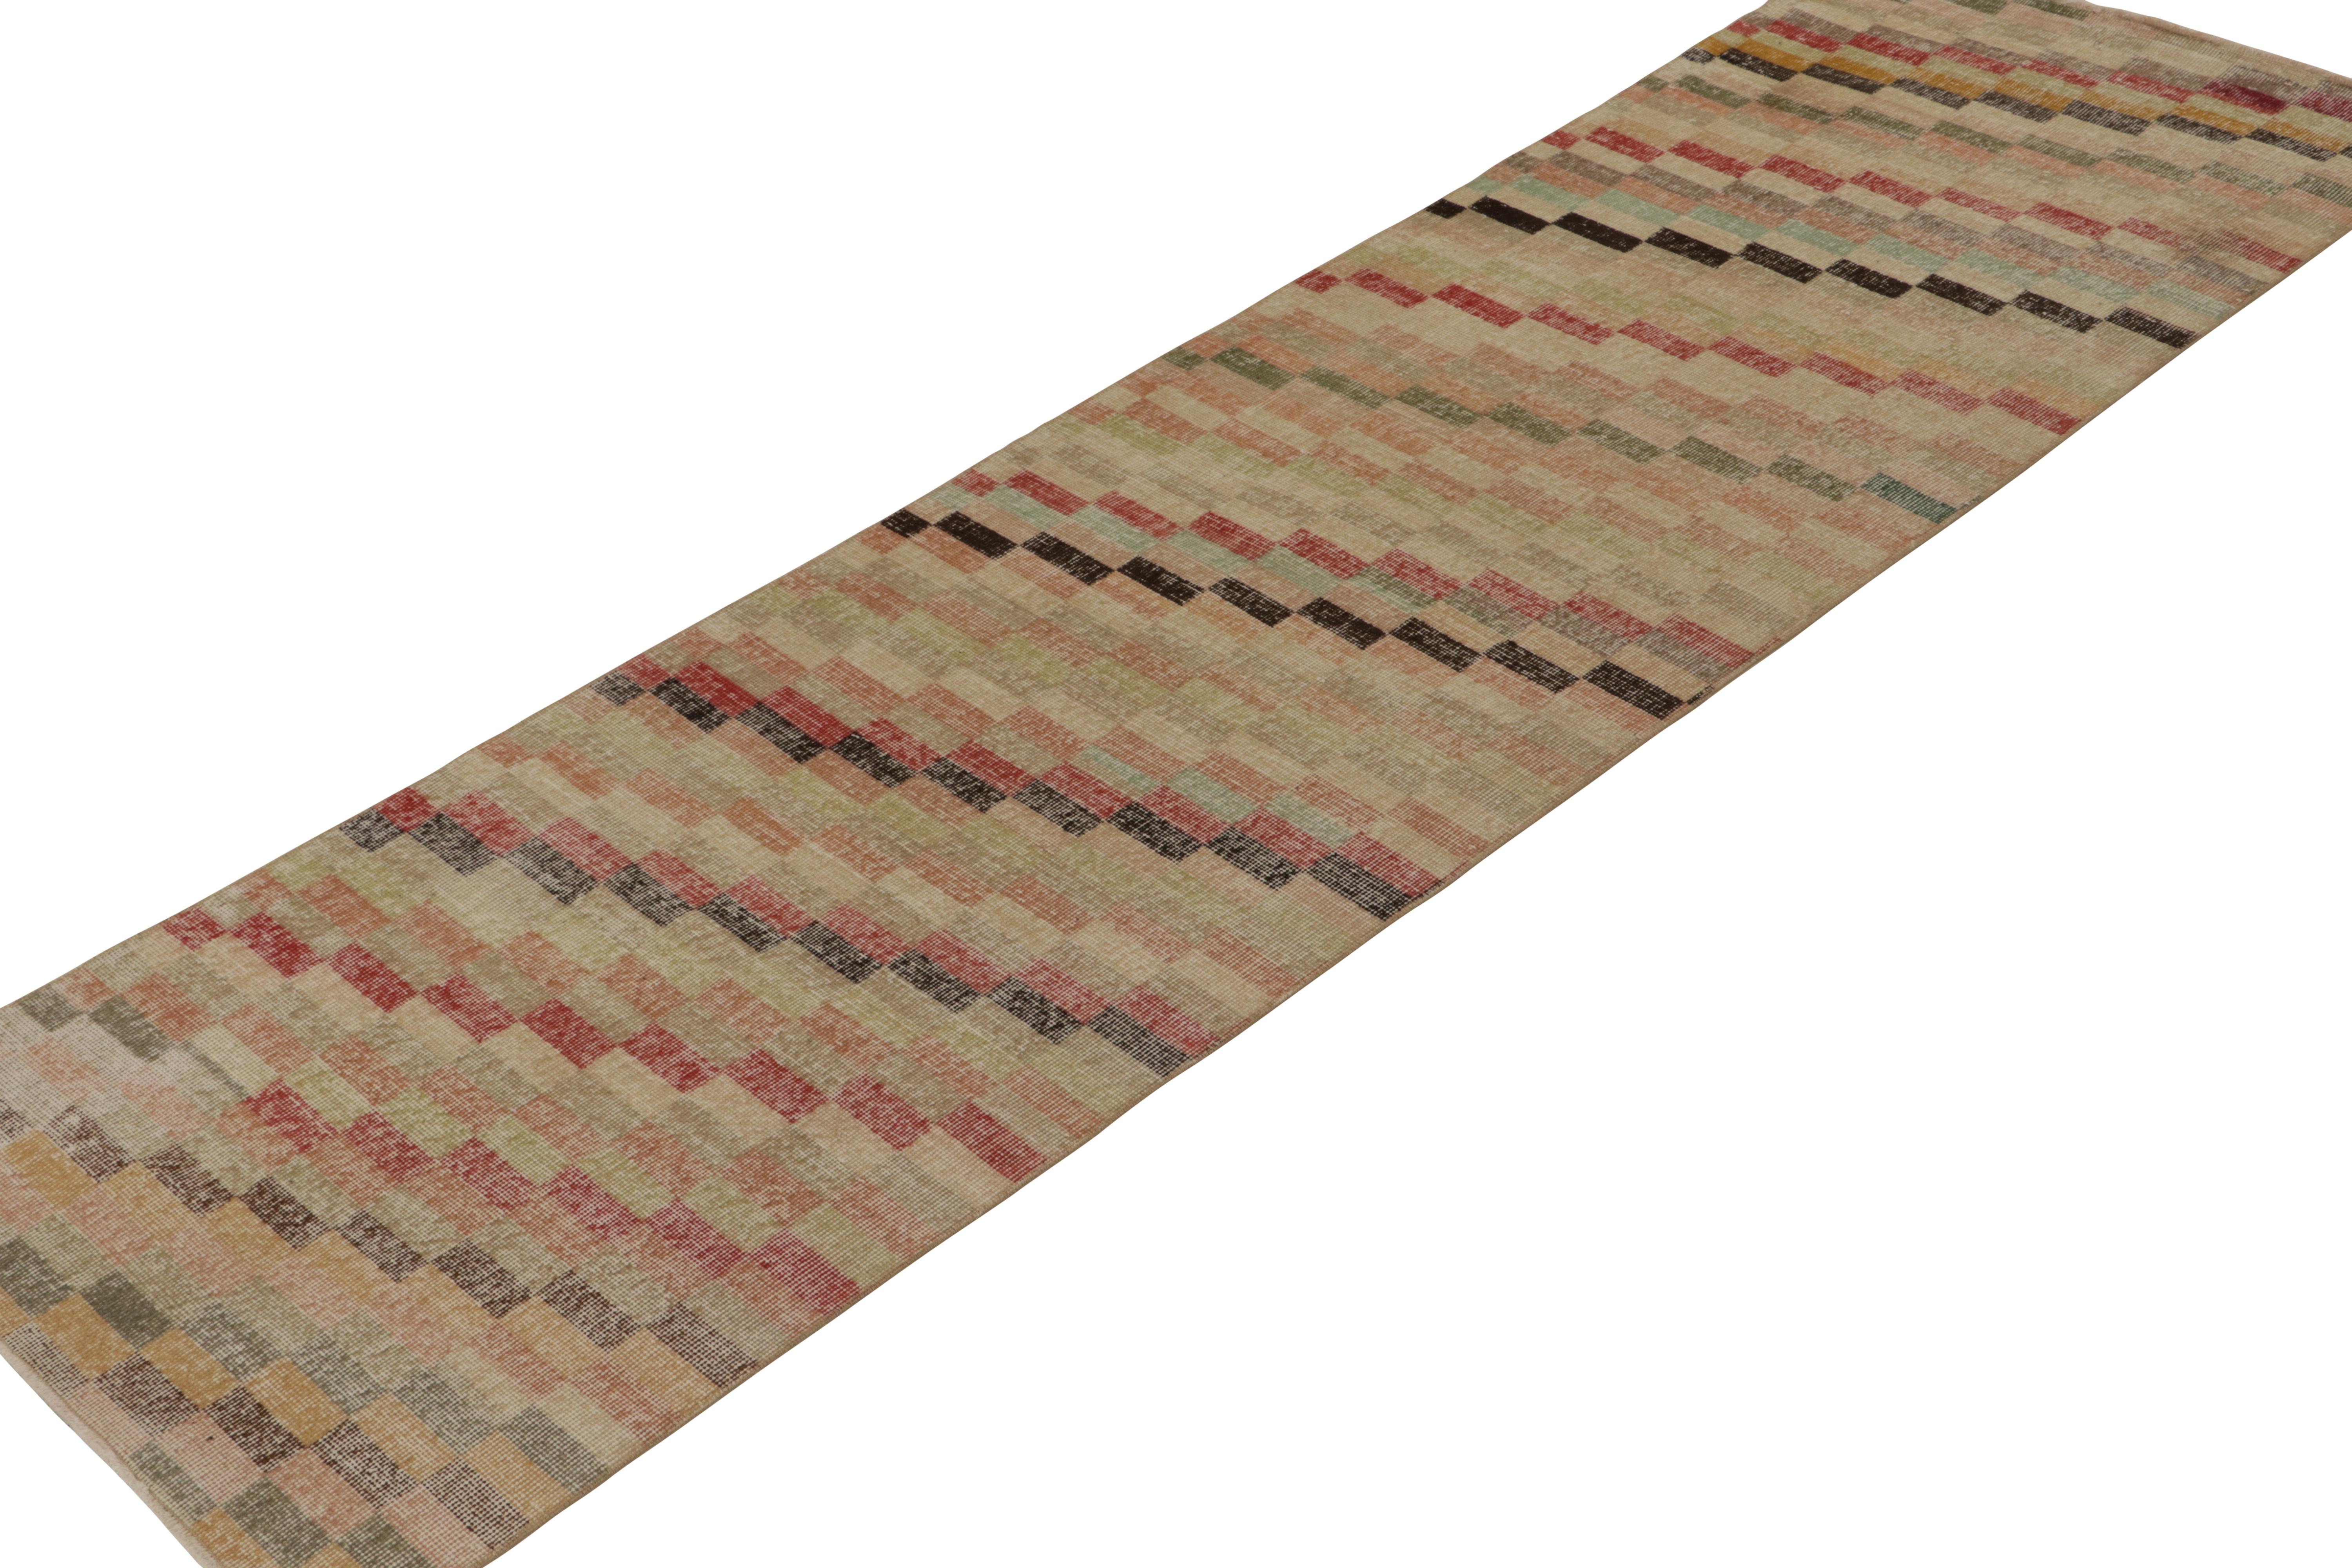 This vintage 3x10 runner is a new addition to Rug & Kilim’s commemorative Mid-Century Pasha Collection. This line is a commemoration of rare curations we believe to hail from mid-century Turkish designer Zeki Müren.

Further on the Design:

This